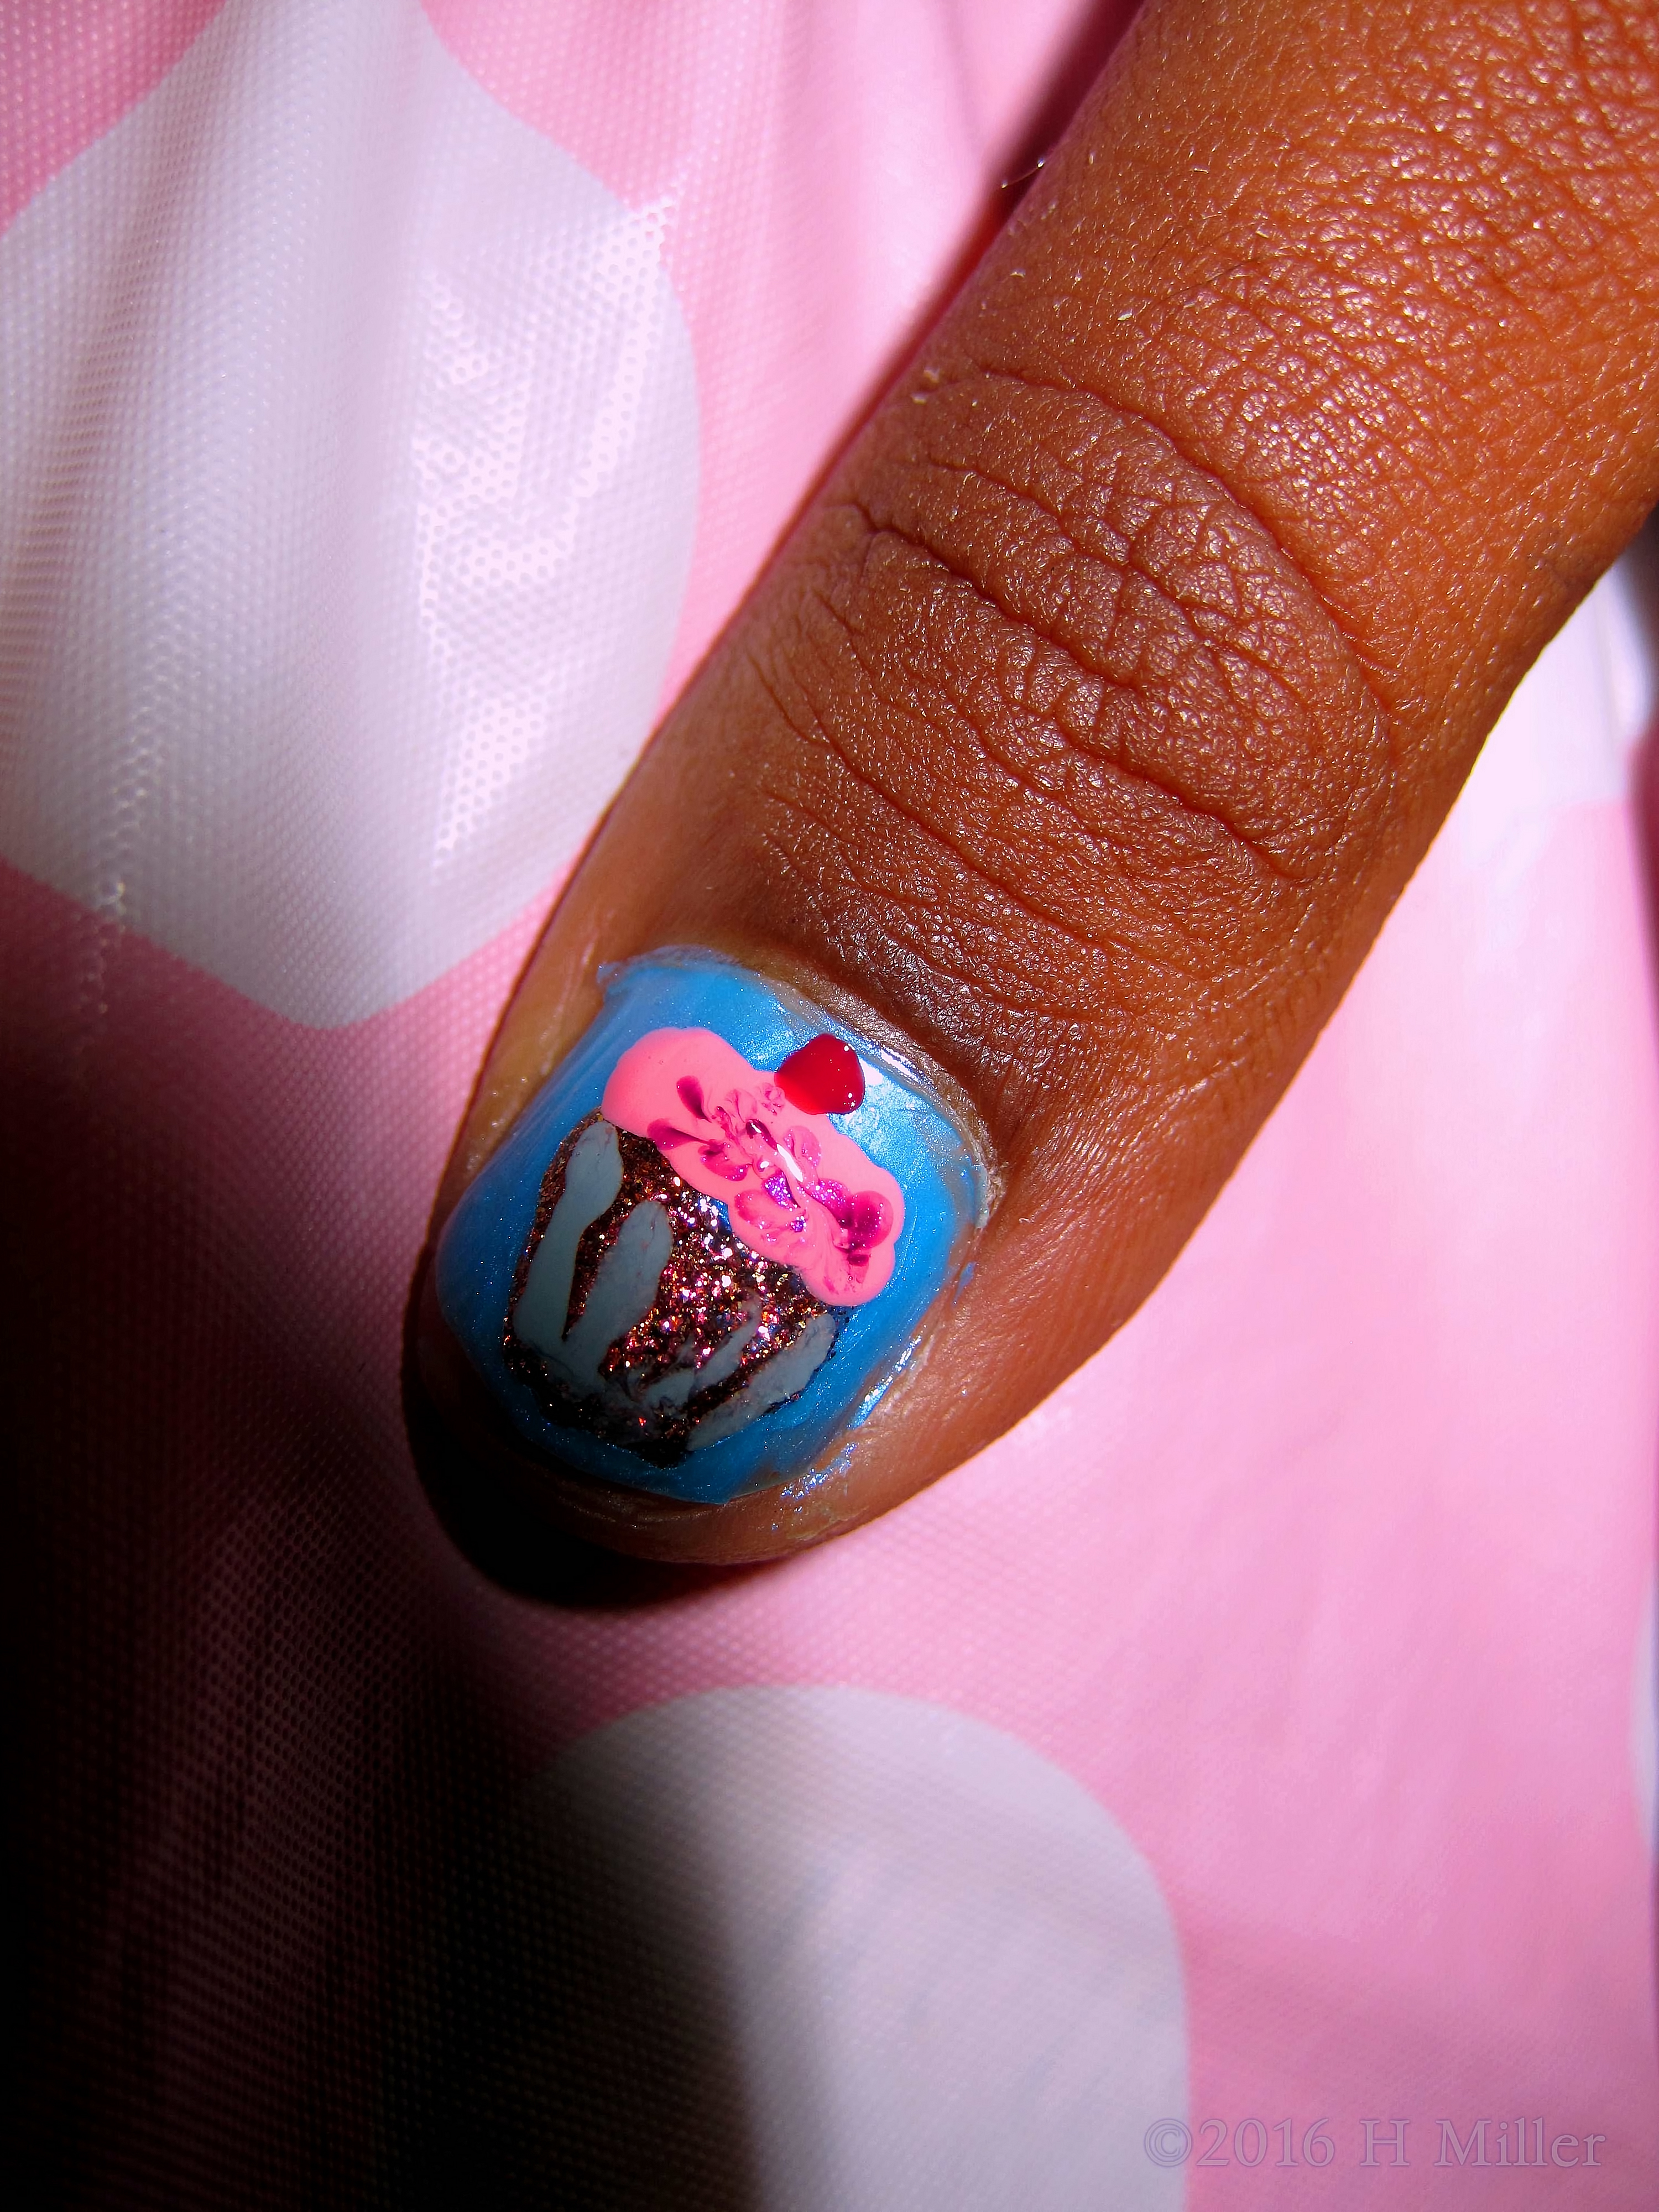 What A Sweet Nail Art Design! Cupcakes That Look Super Cool! 